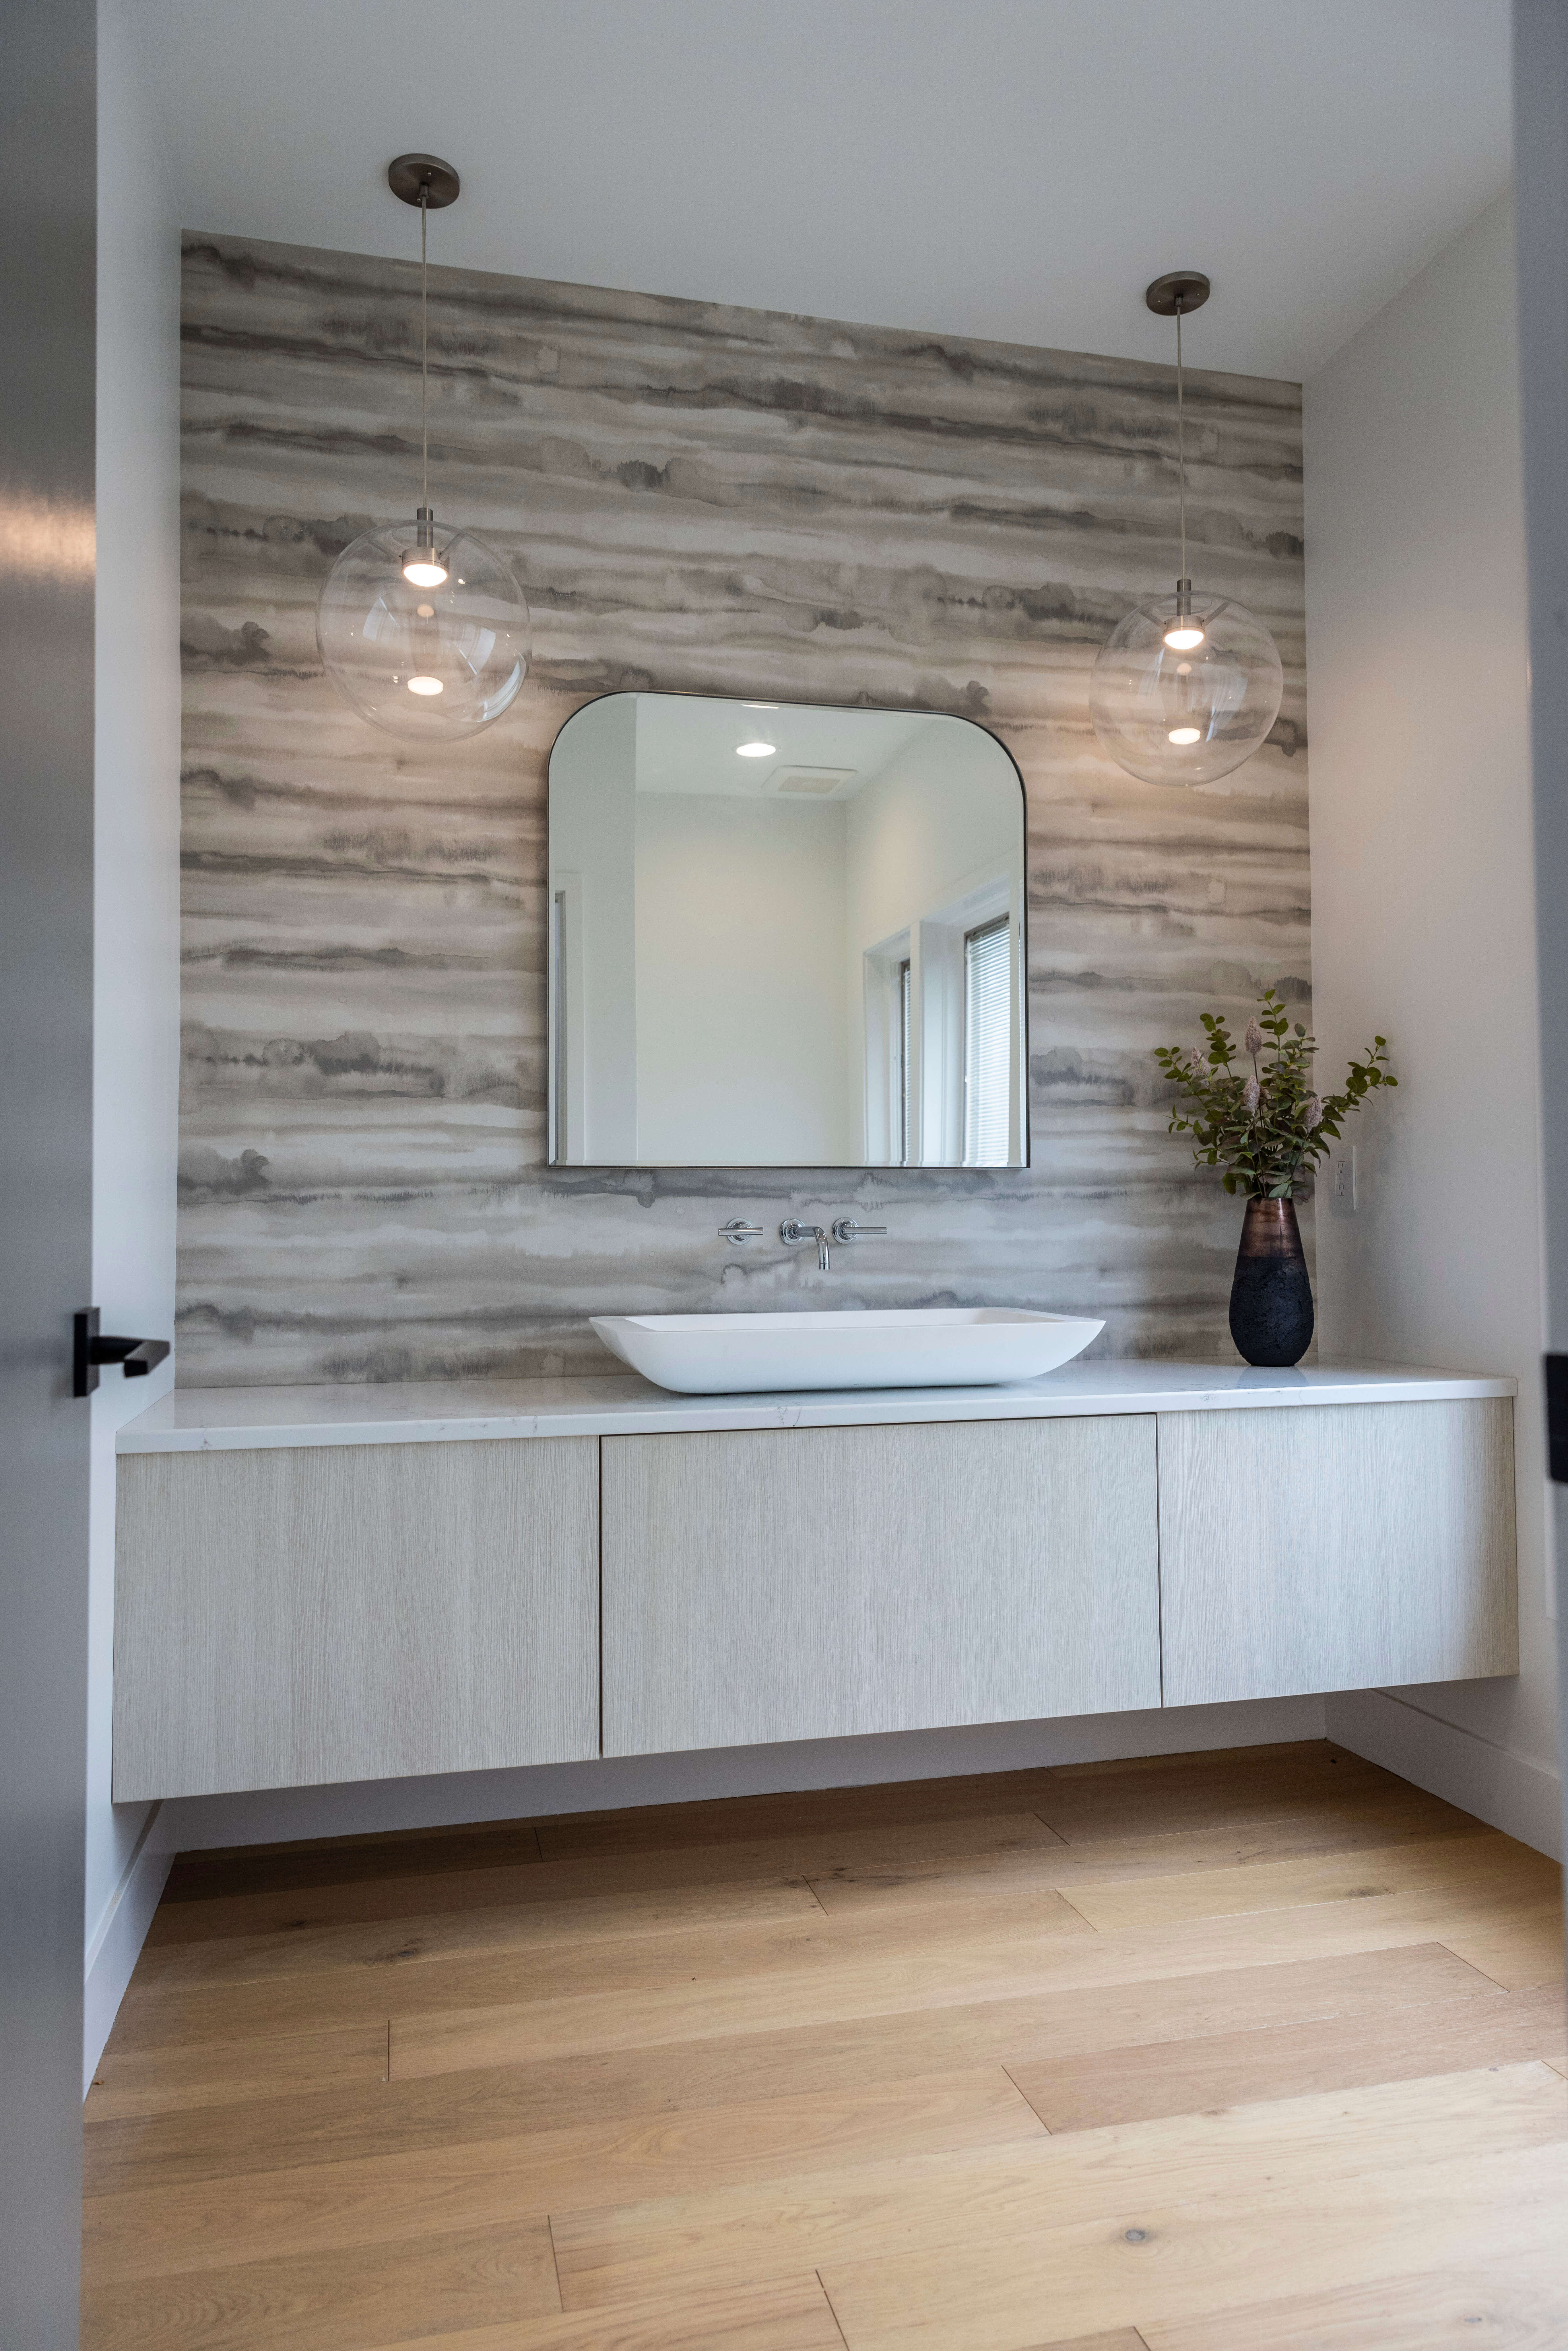 A soft contemporary bathroom design with light stained wood and beige finishes with a slab styled floating vanity cabinet.